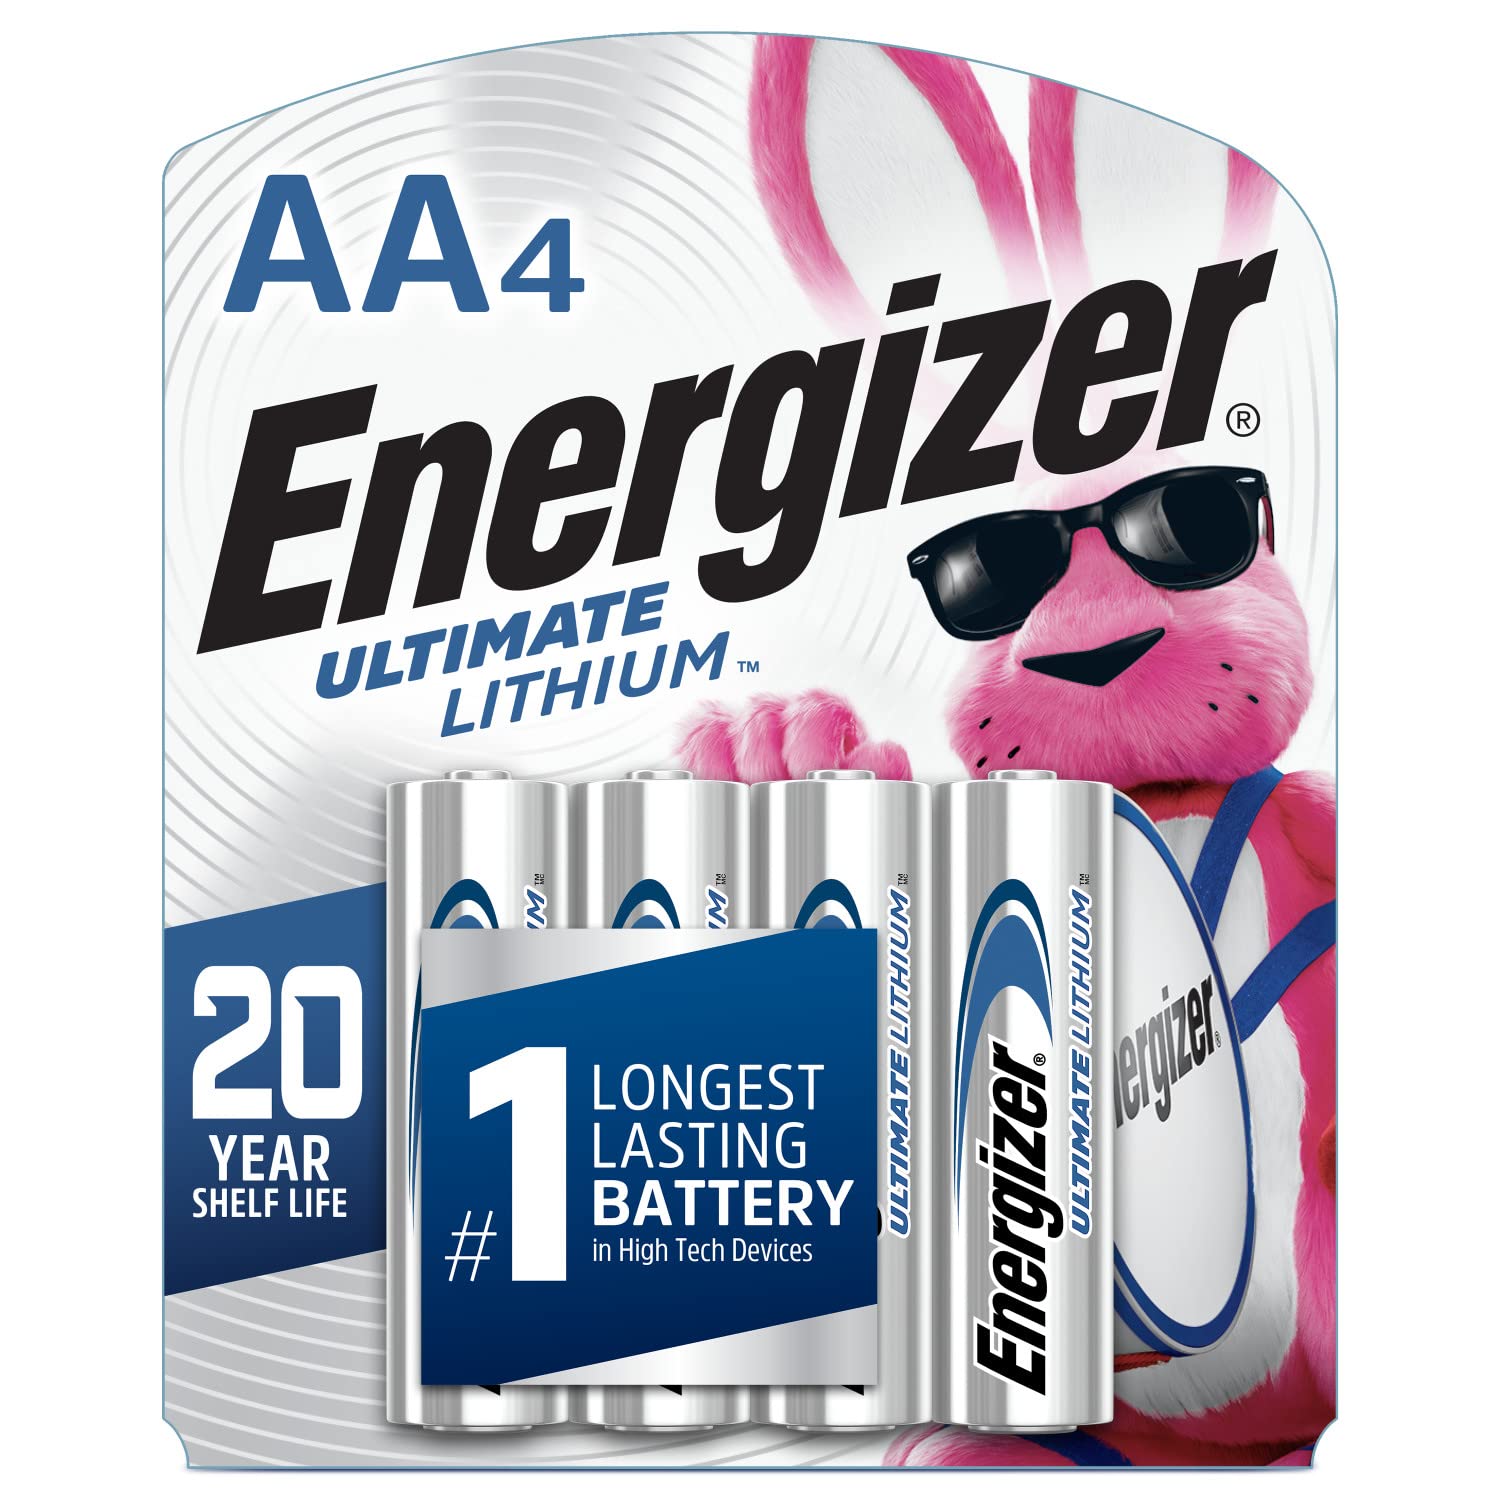 Energizer AA Ultimate Lithium Batteries 4-Pack $7.12 or less with Amazon S&S $6.68